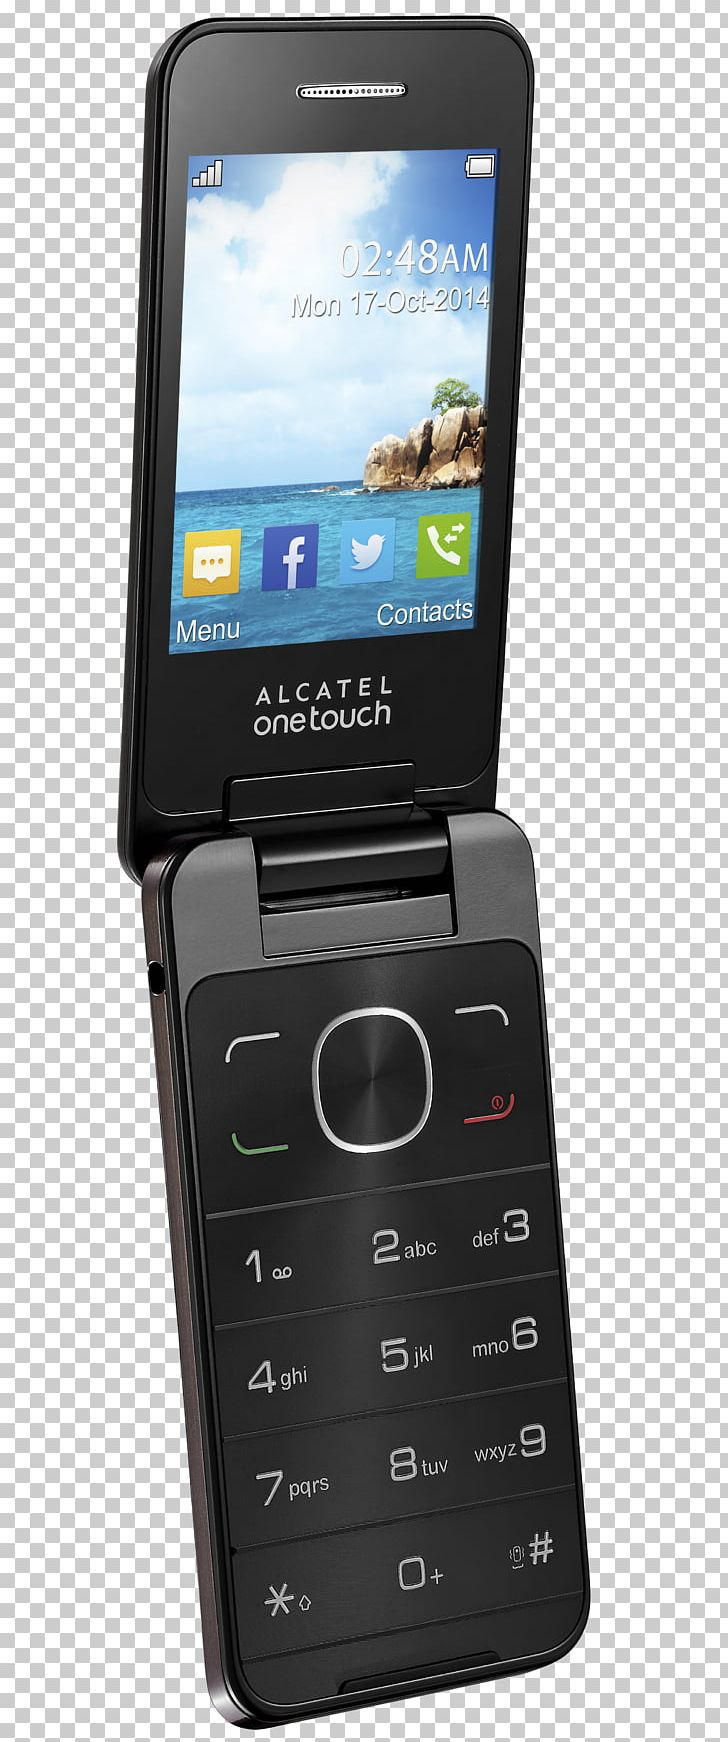 Alcatel One Touch Alcatel Mobile Clamshell Design Telephone Smartphone PNG, Clipart, Alcatel Mobile, Clamshell Design, Communication Device, Dual Sim, Electronic Device Free PNG Download